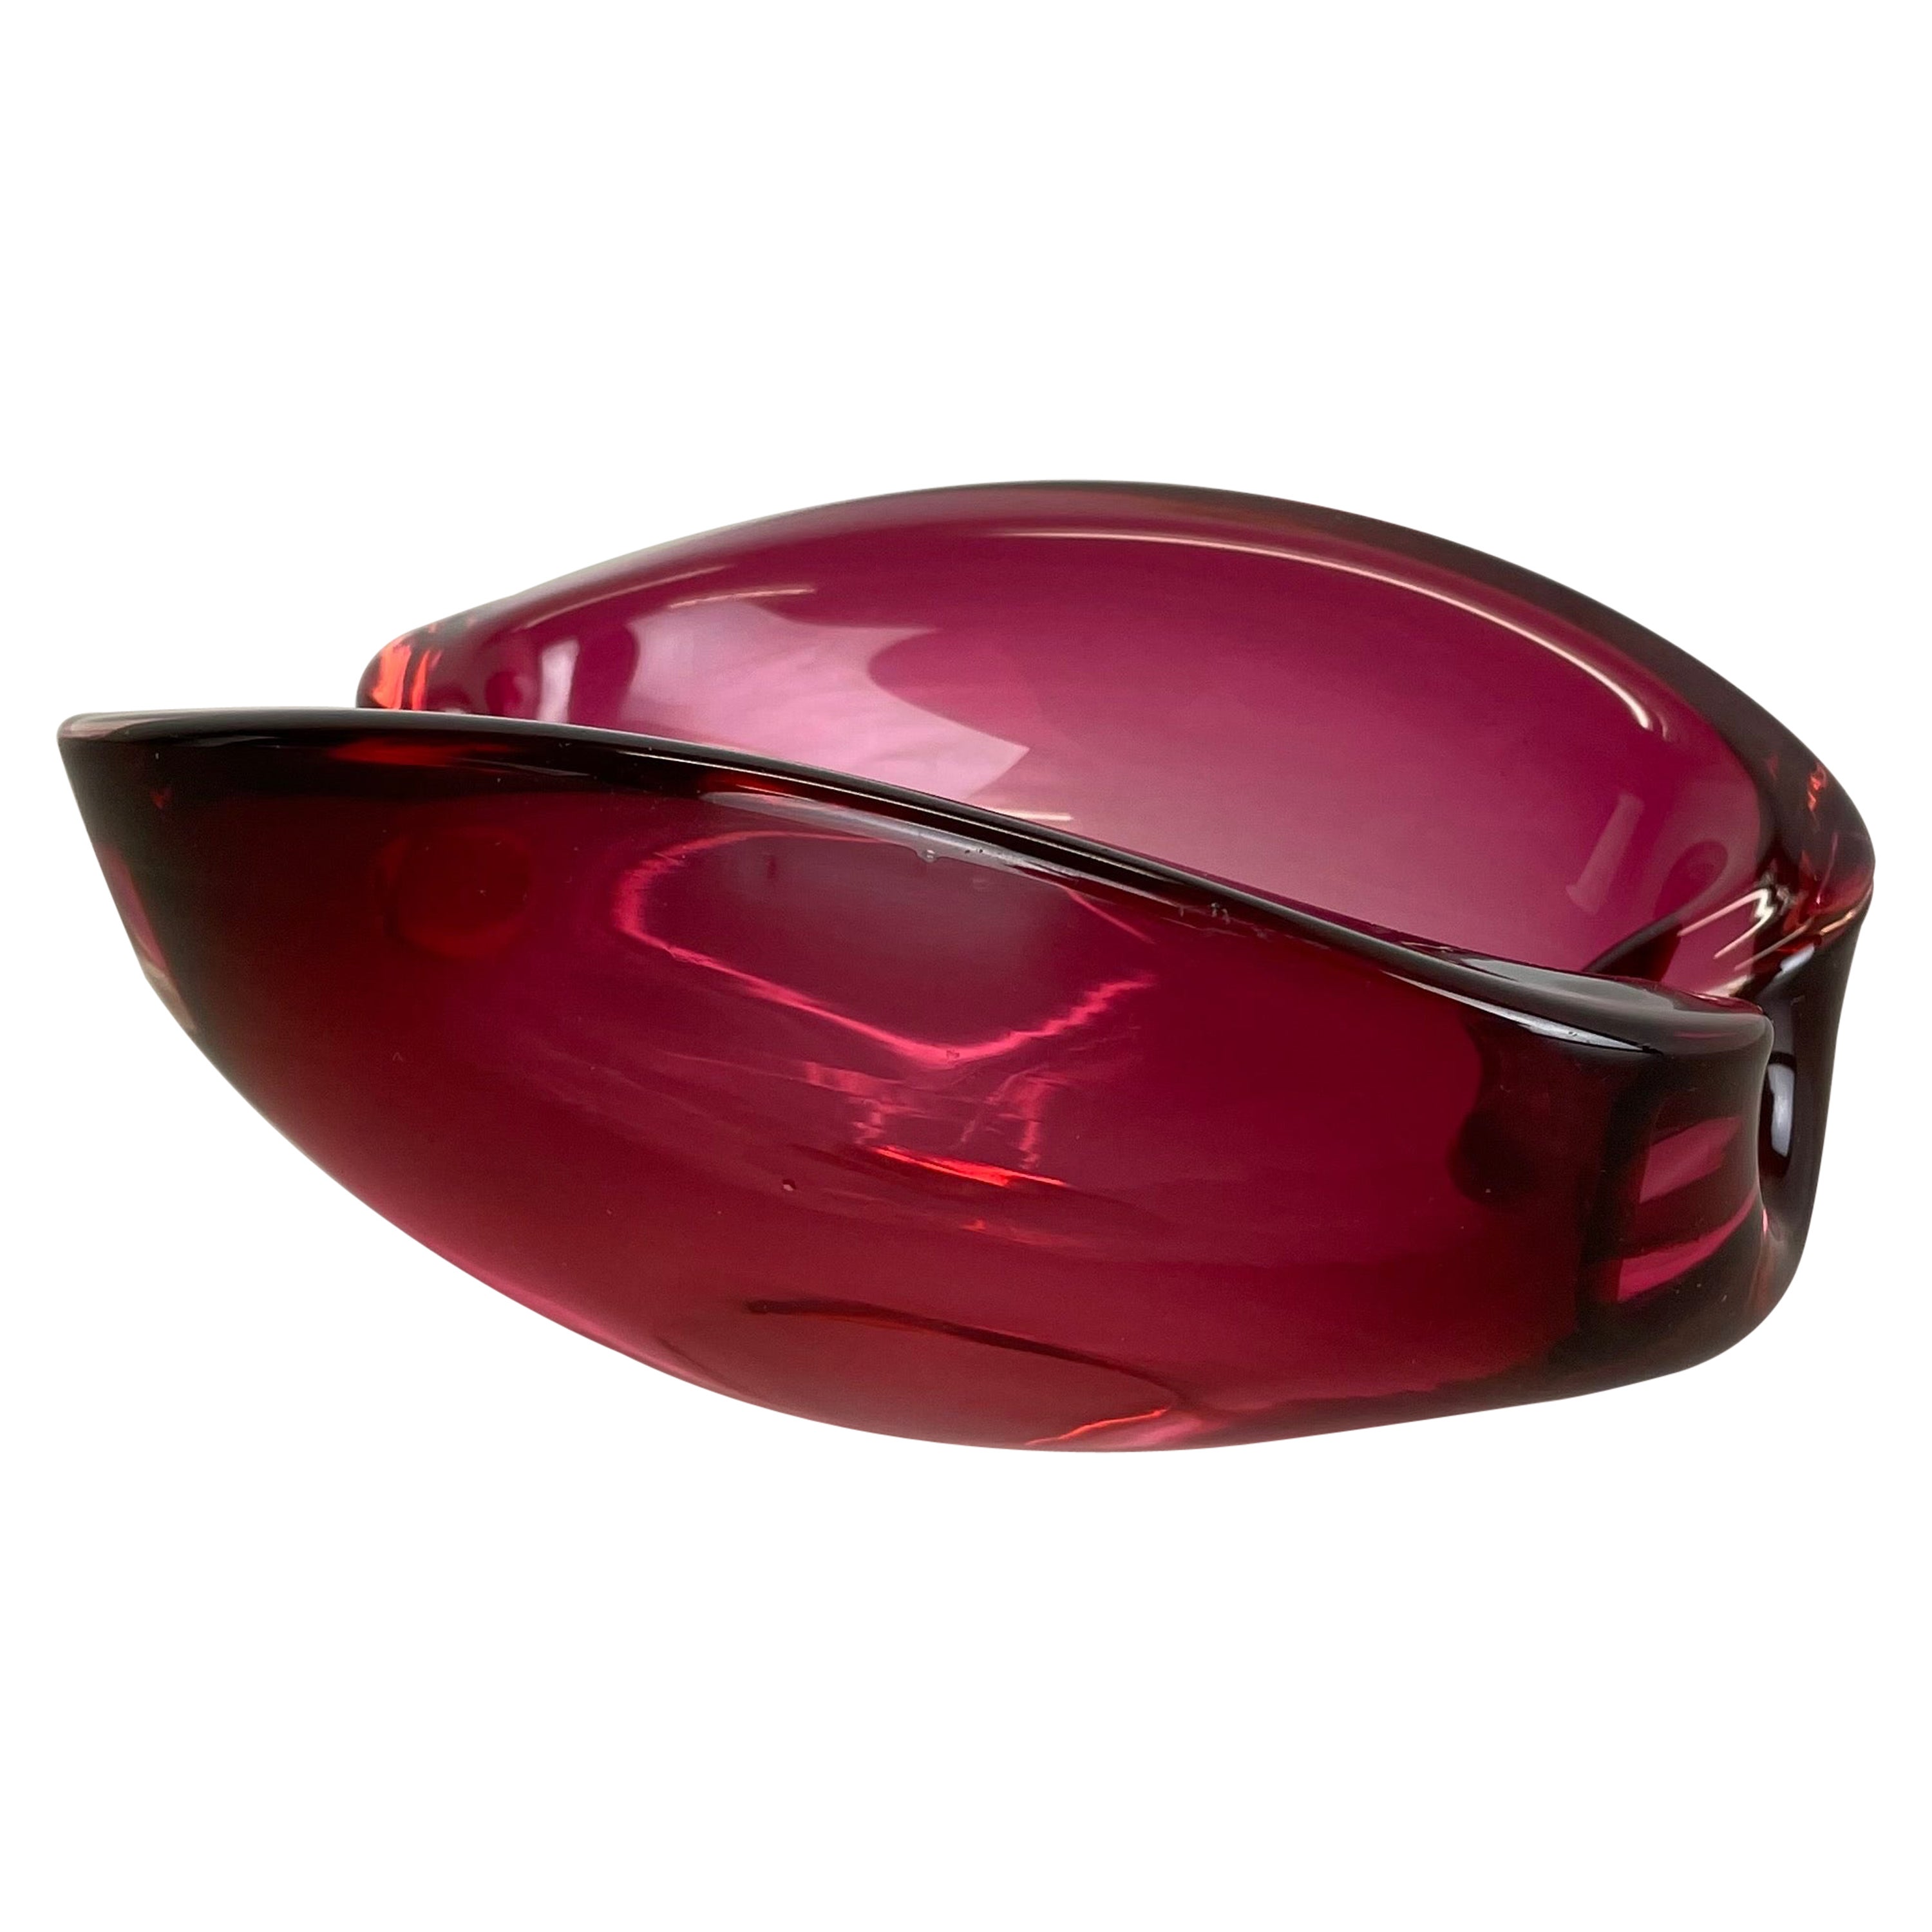 Large Murano Glass "Pink" Floral Bowl Element Shell Ashtray Murano, Italy, 1970s